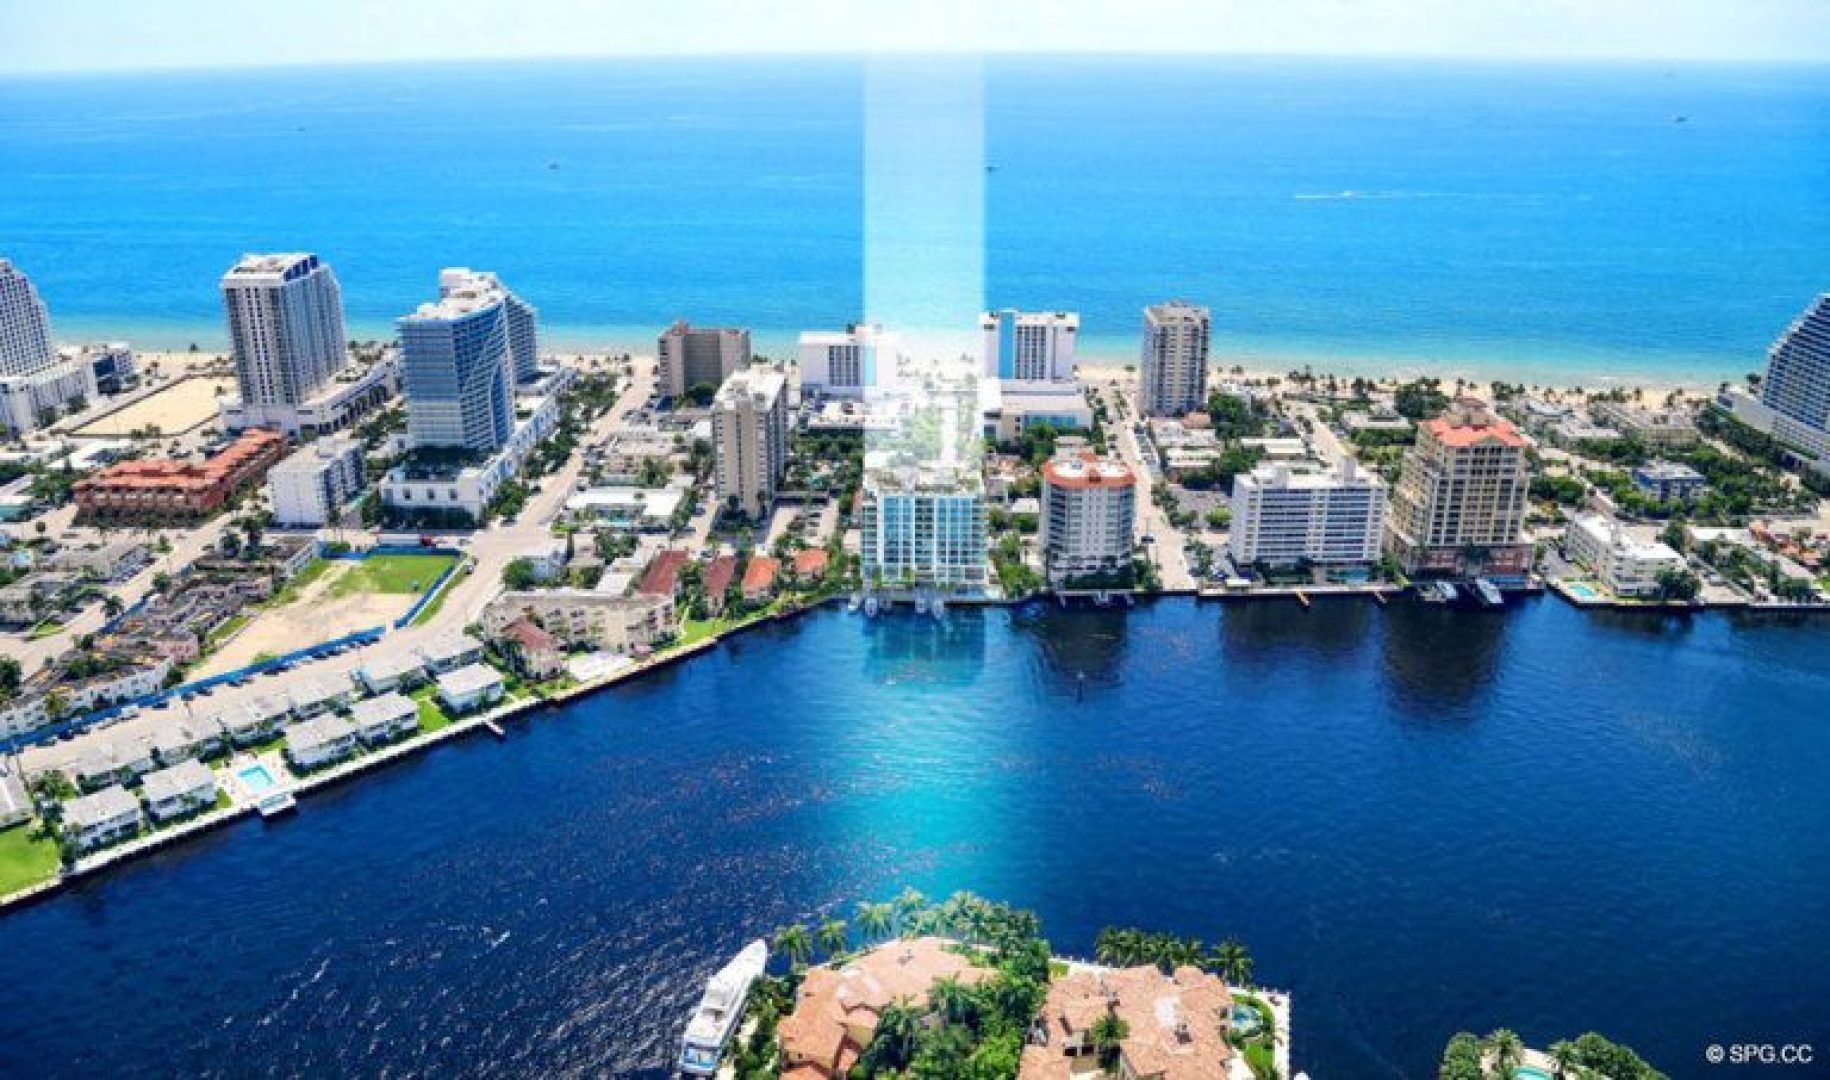 East View of 321 at Water's Edge, Luxury Waterfront Condos in Fort Lauderdale, Florida 33304